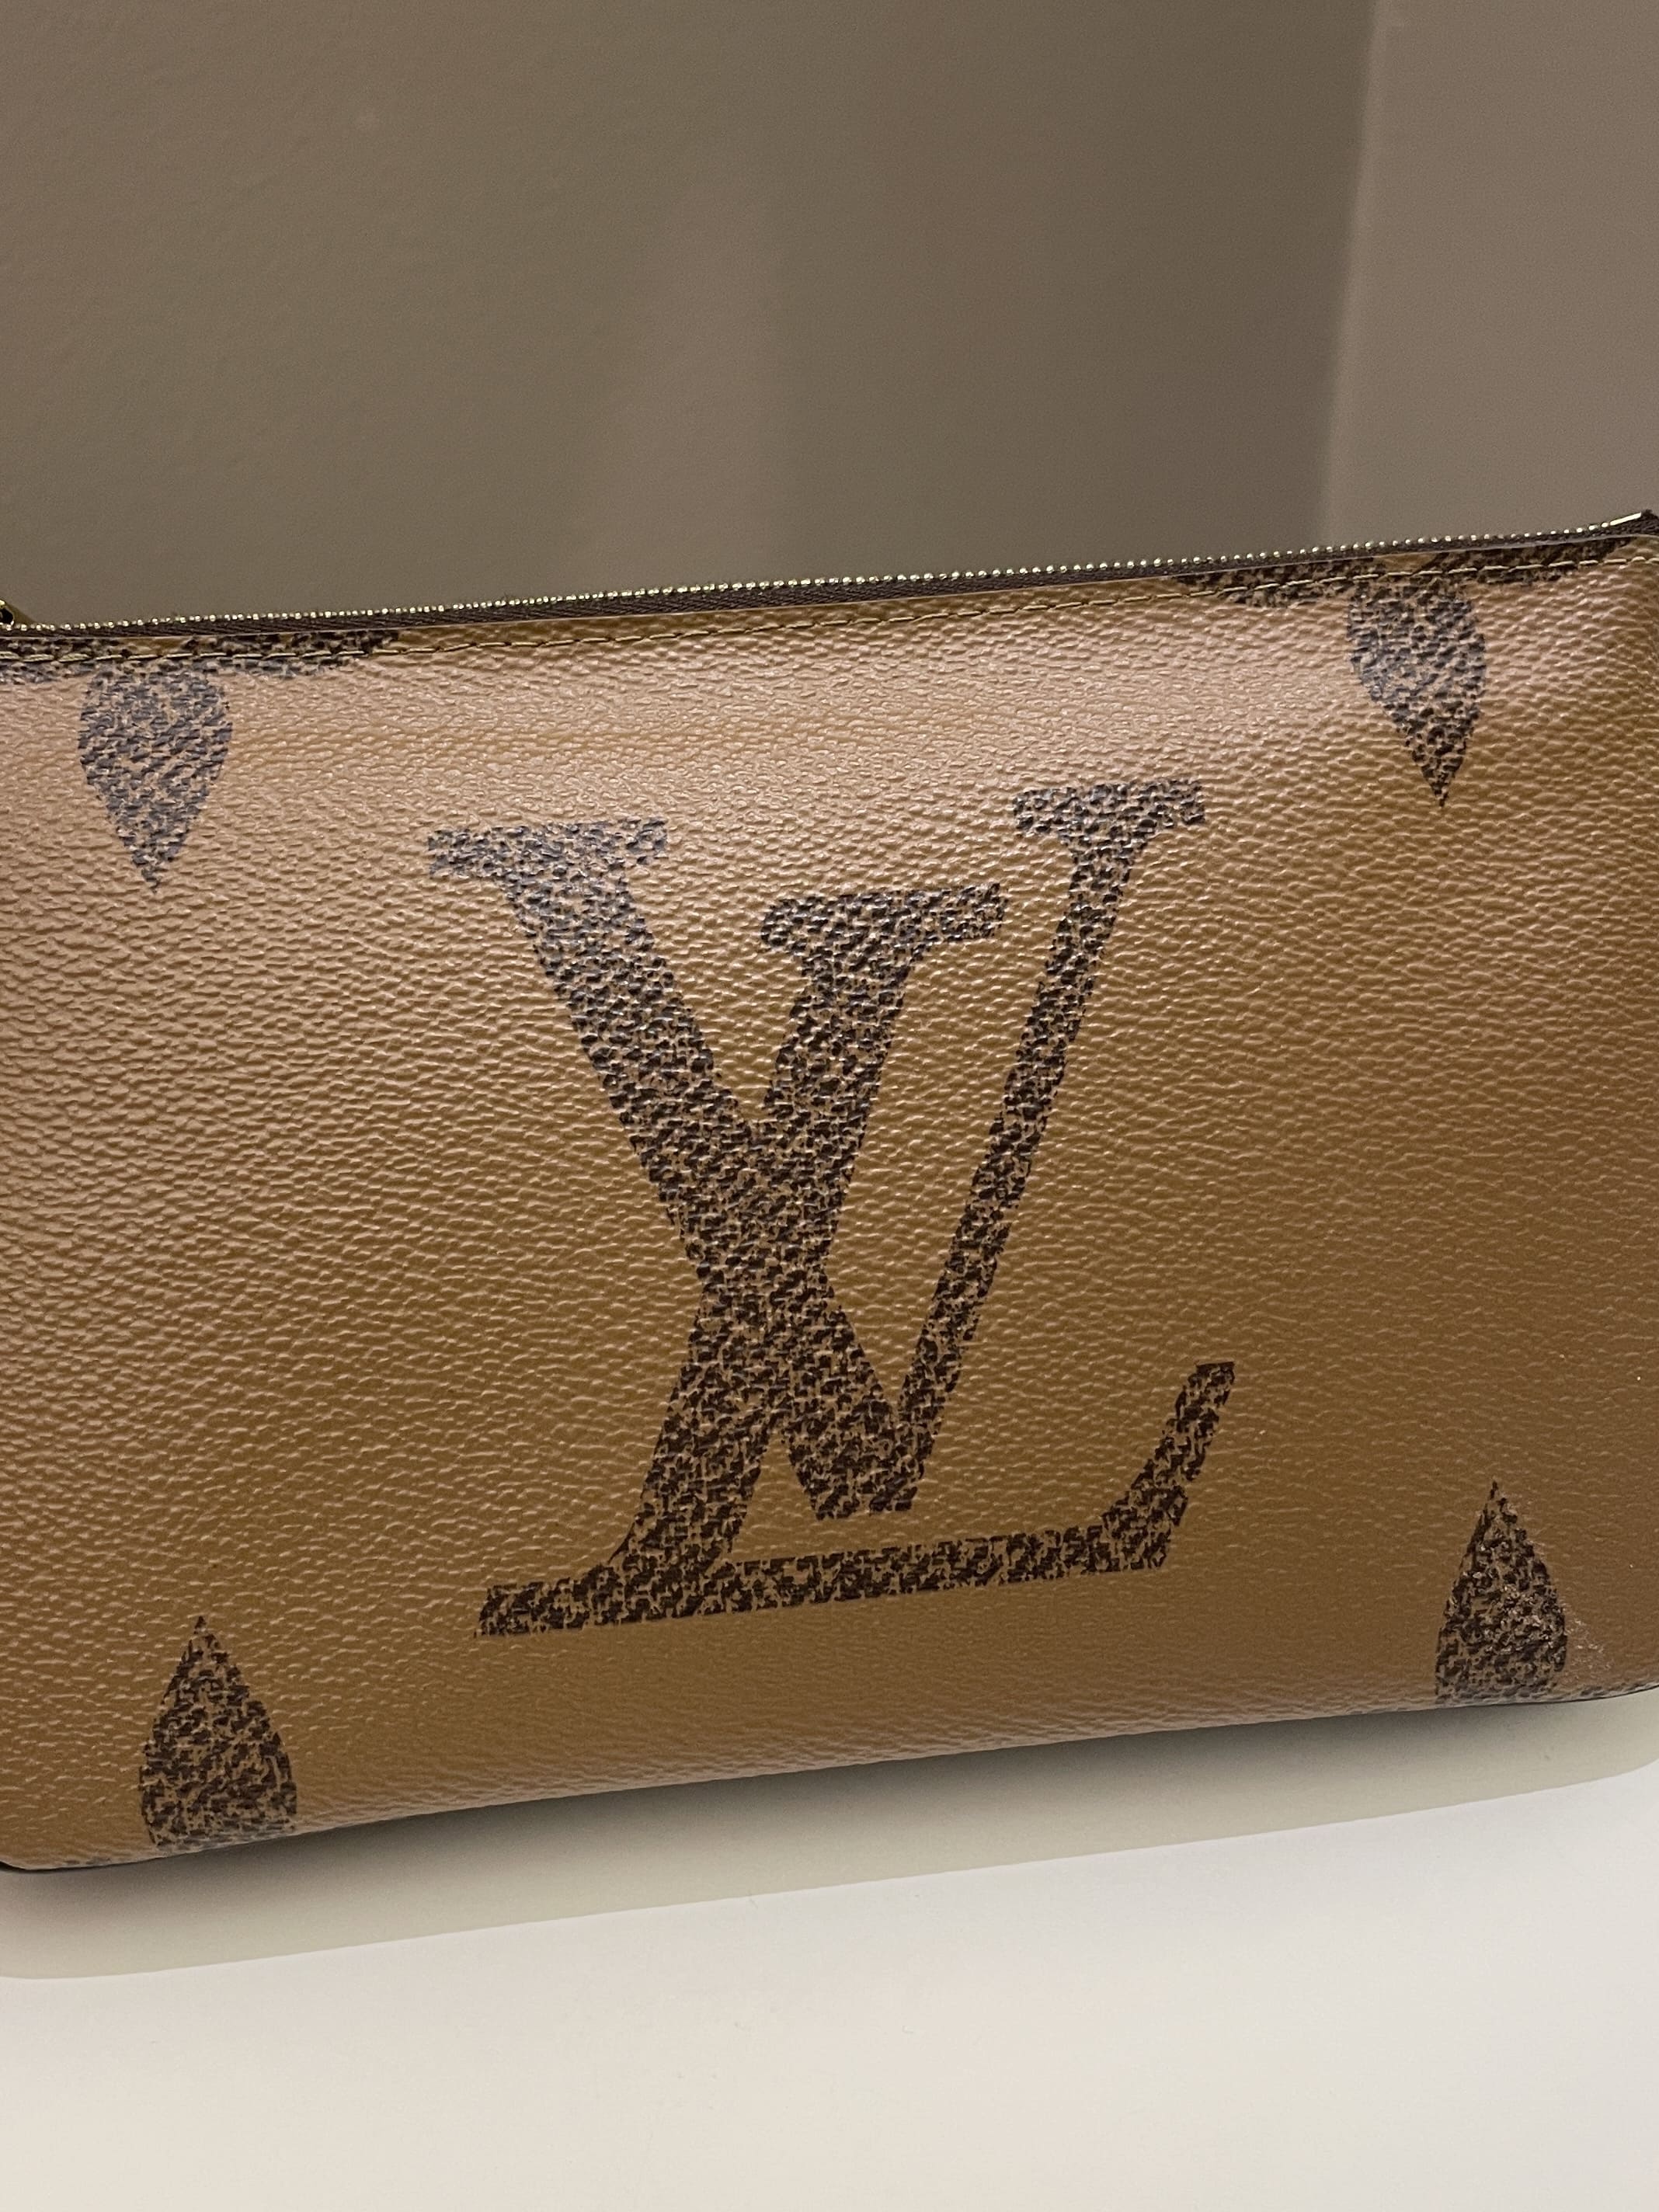 Louis Vuitton Pochette Double Zip Mono Giant Red/ Pink Bag at 1stDibs